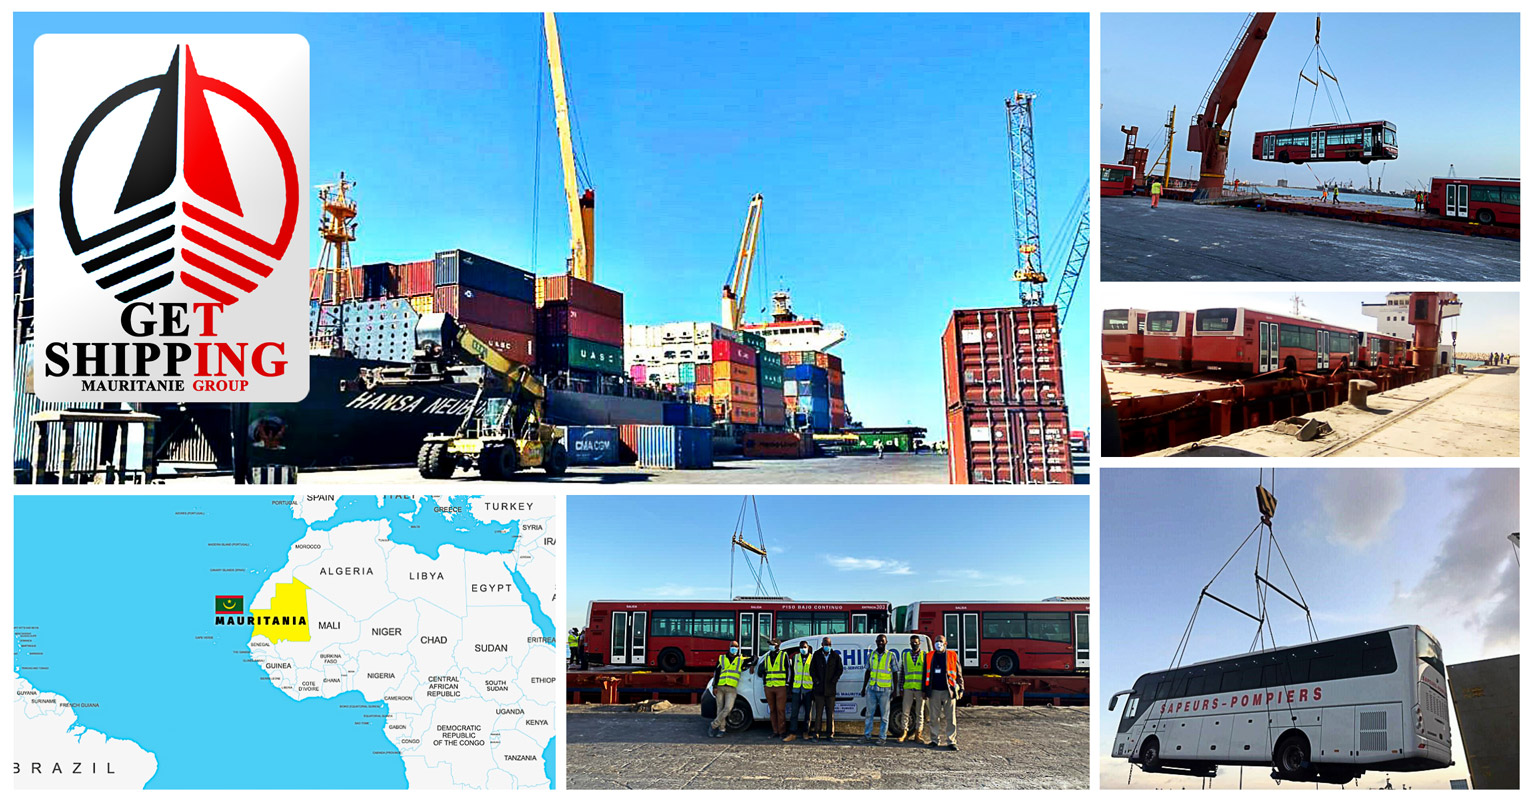 New member representing Mauritania – Get Shipping Mauritanie Group